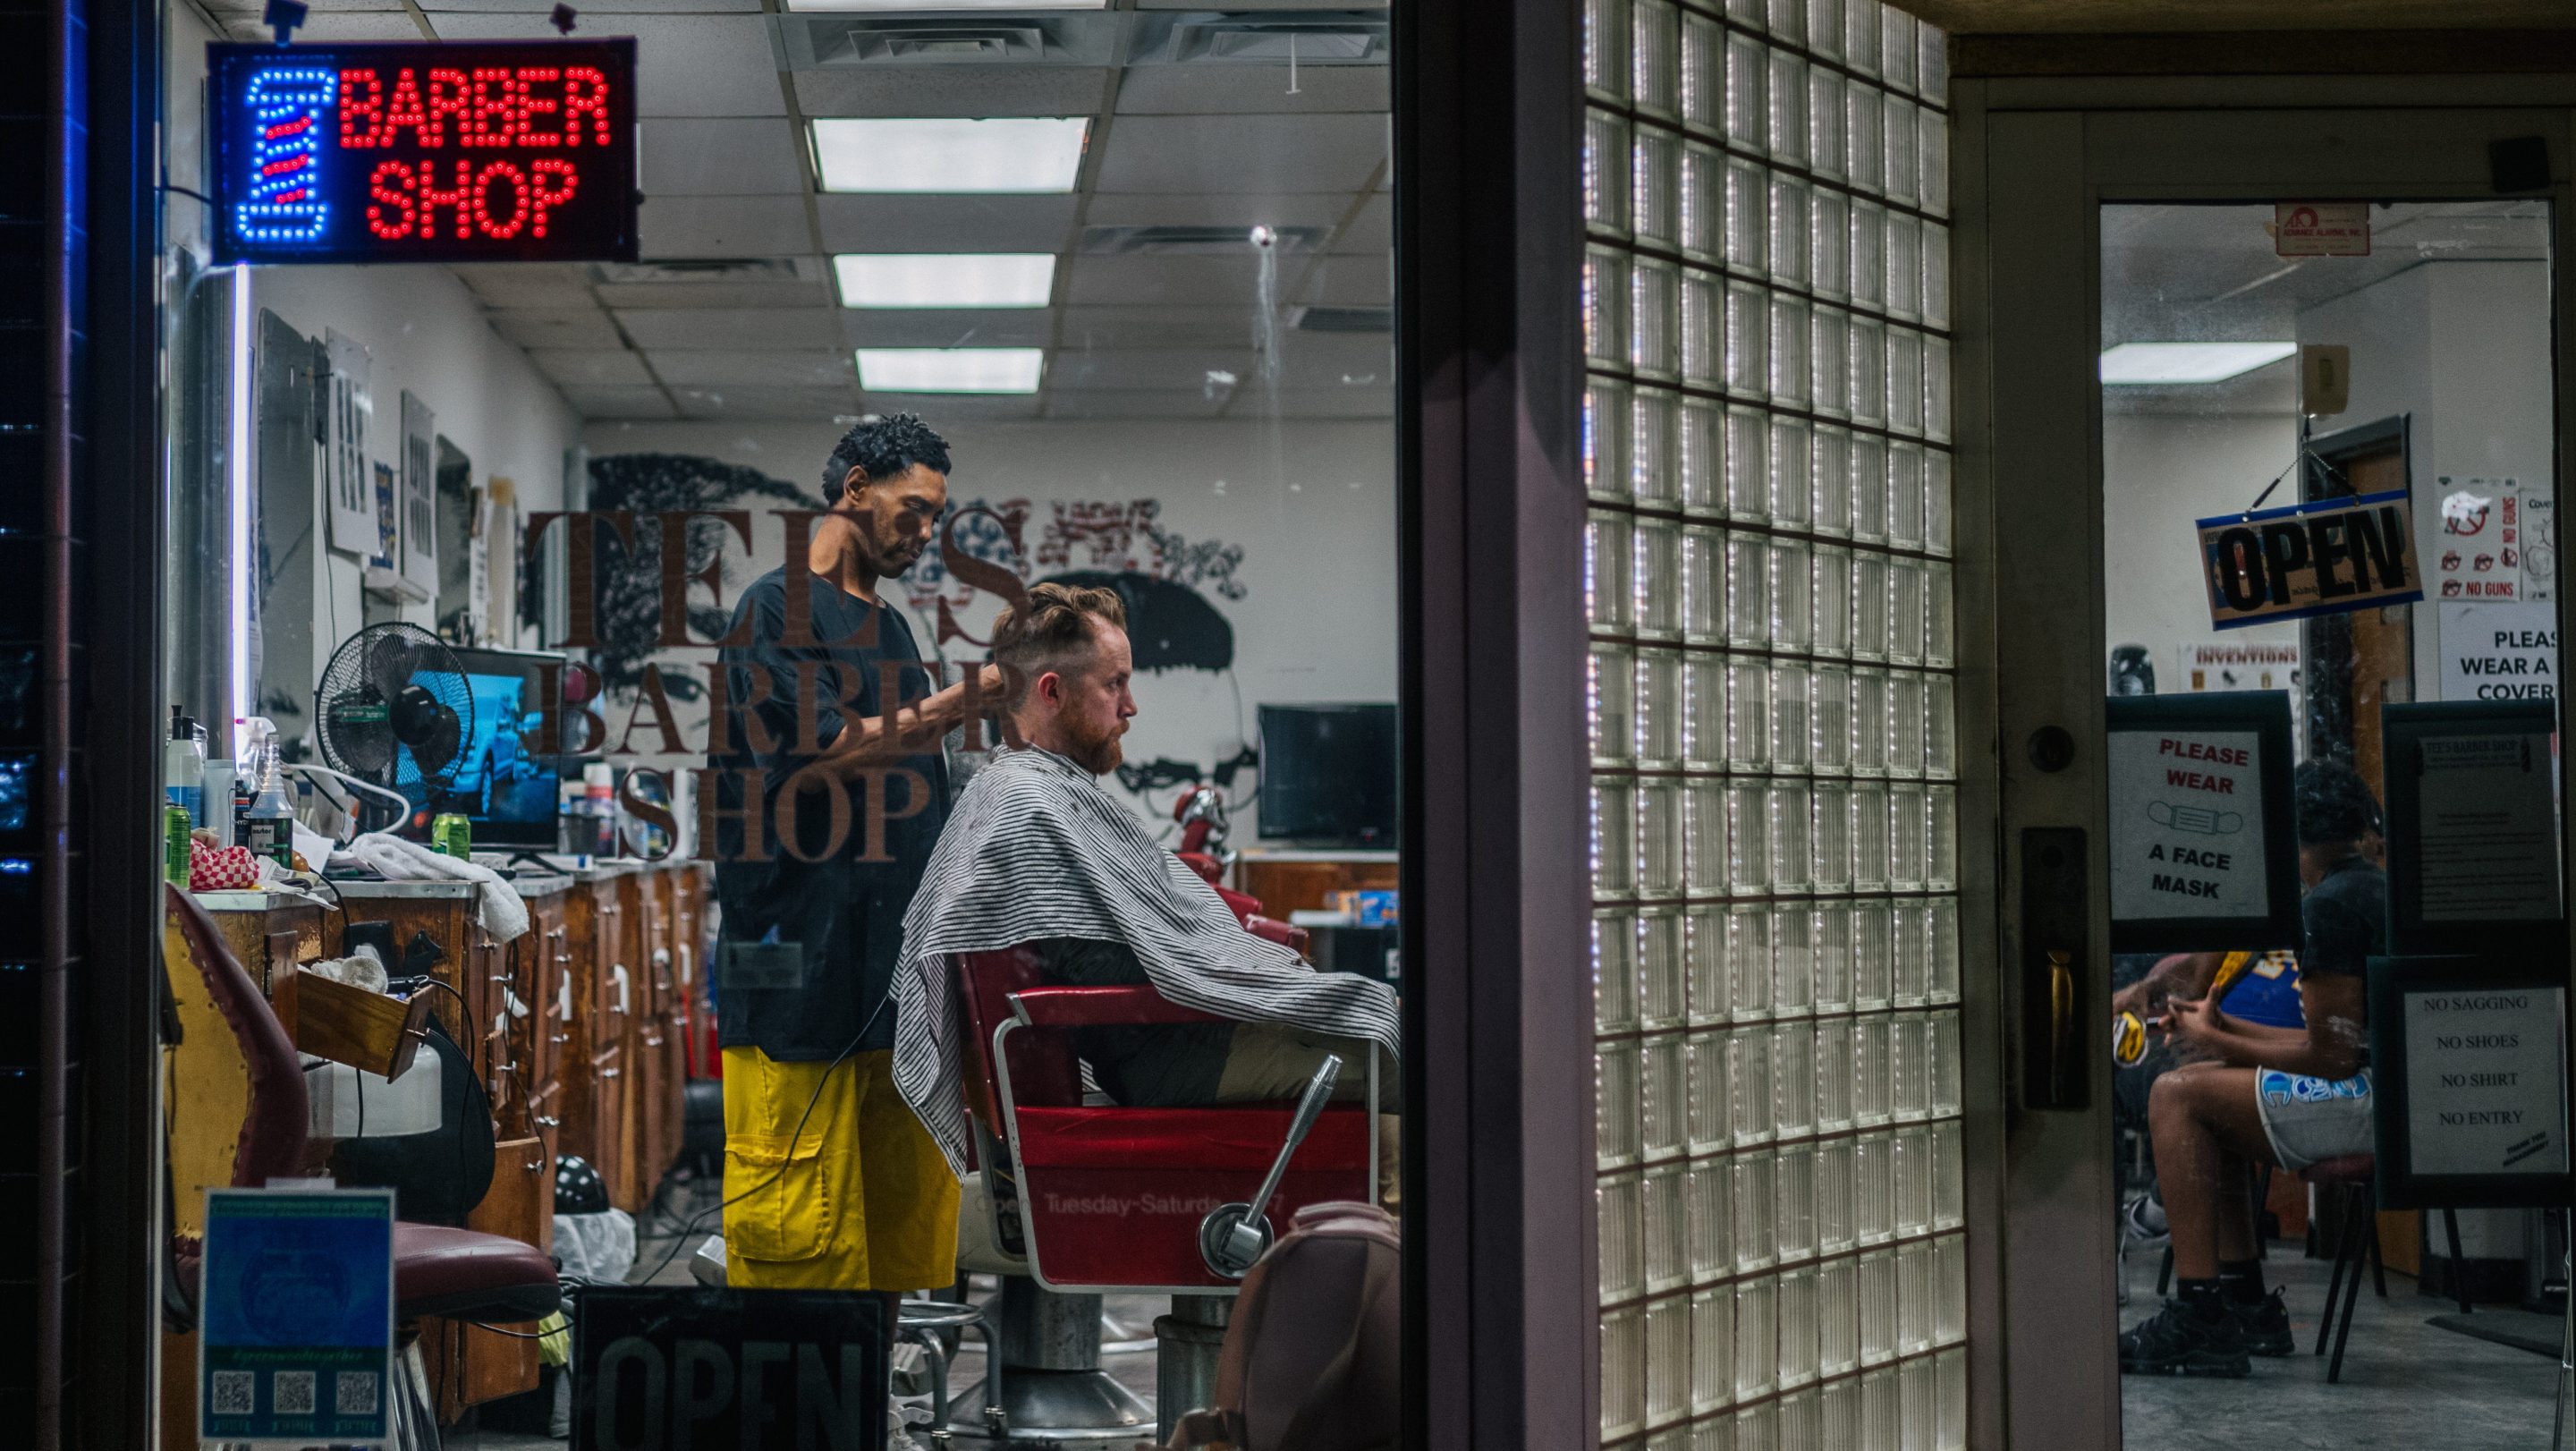 Inflation impacting valley barbers with rising cost of products